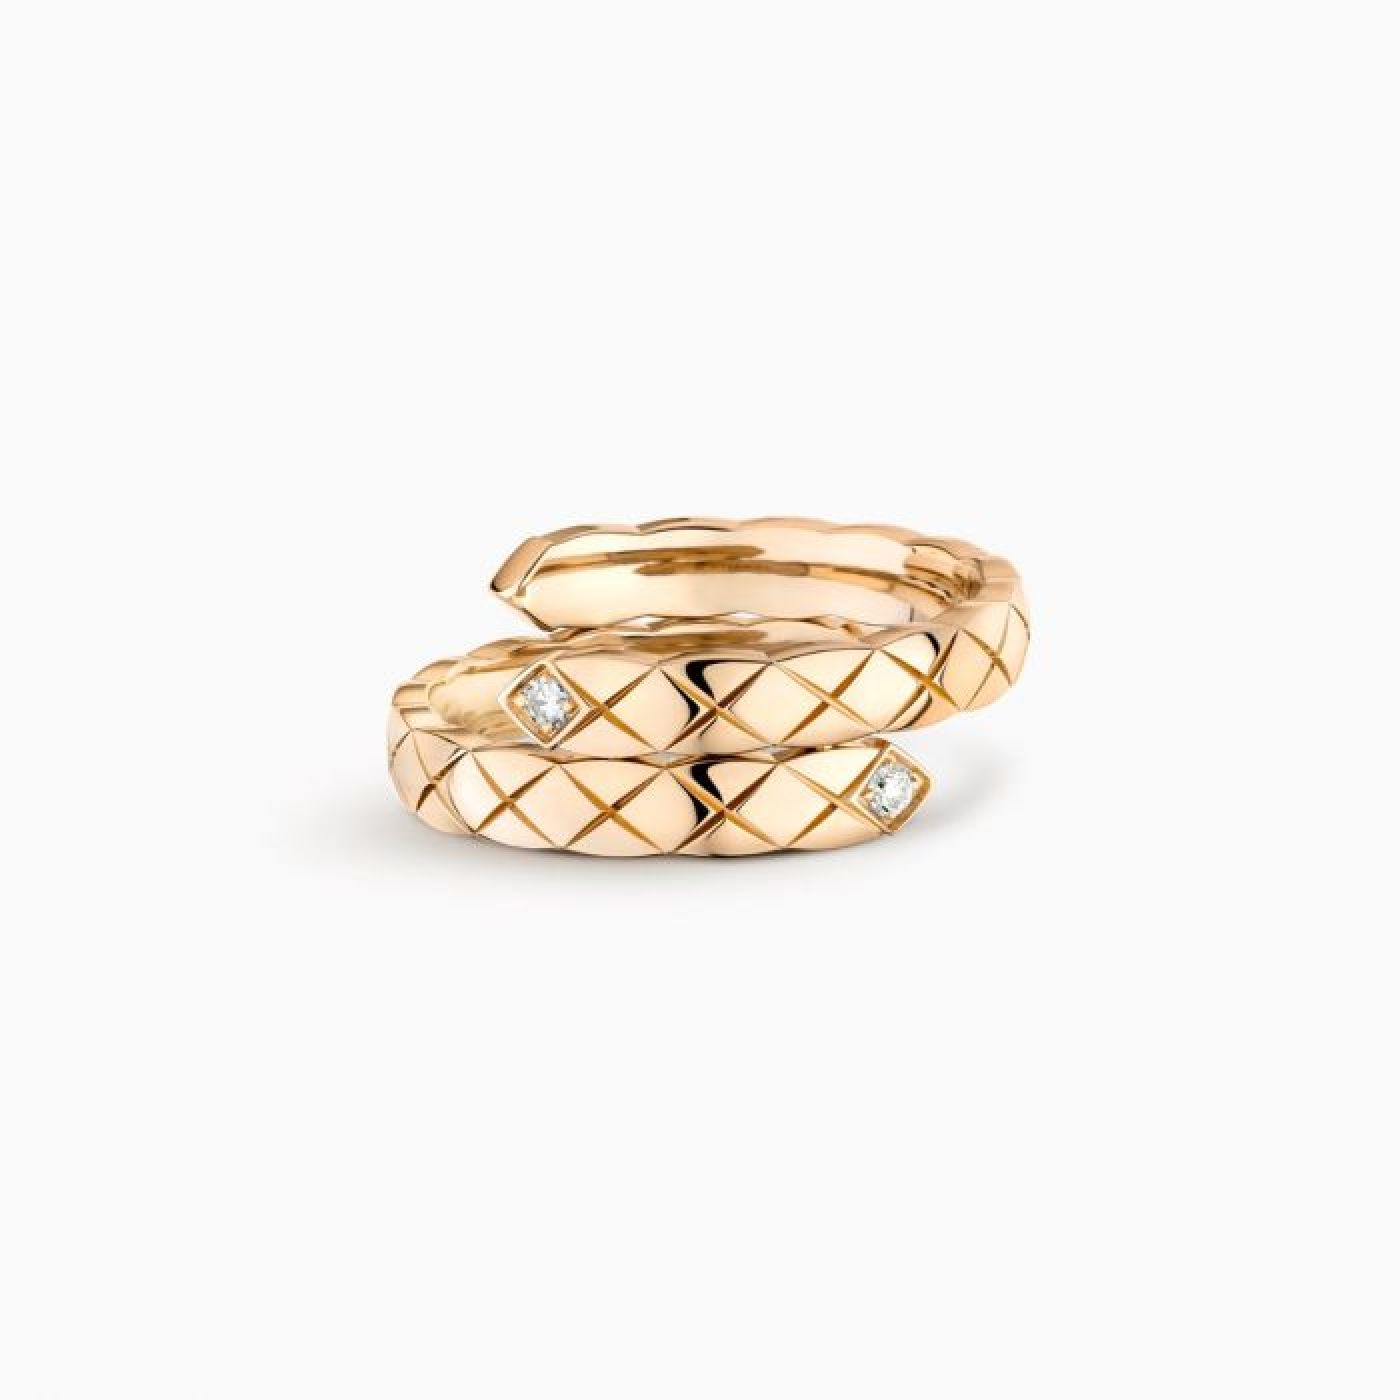 Chanel Coco Crush Toi et Moi ring in beig gold, RABAT Jewels